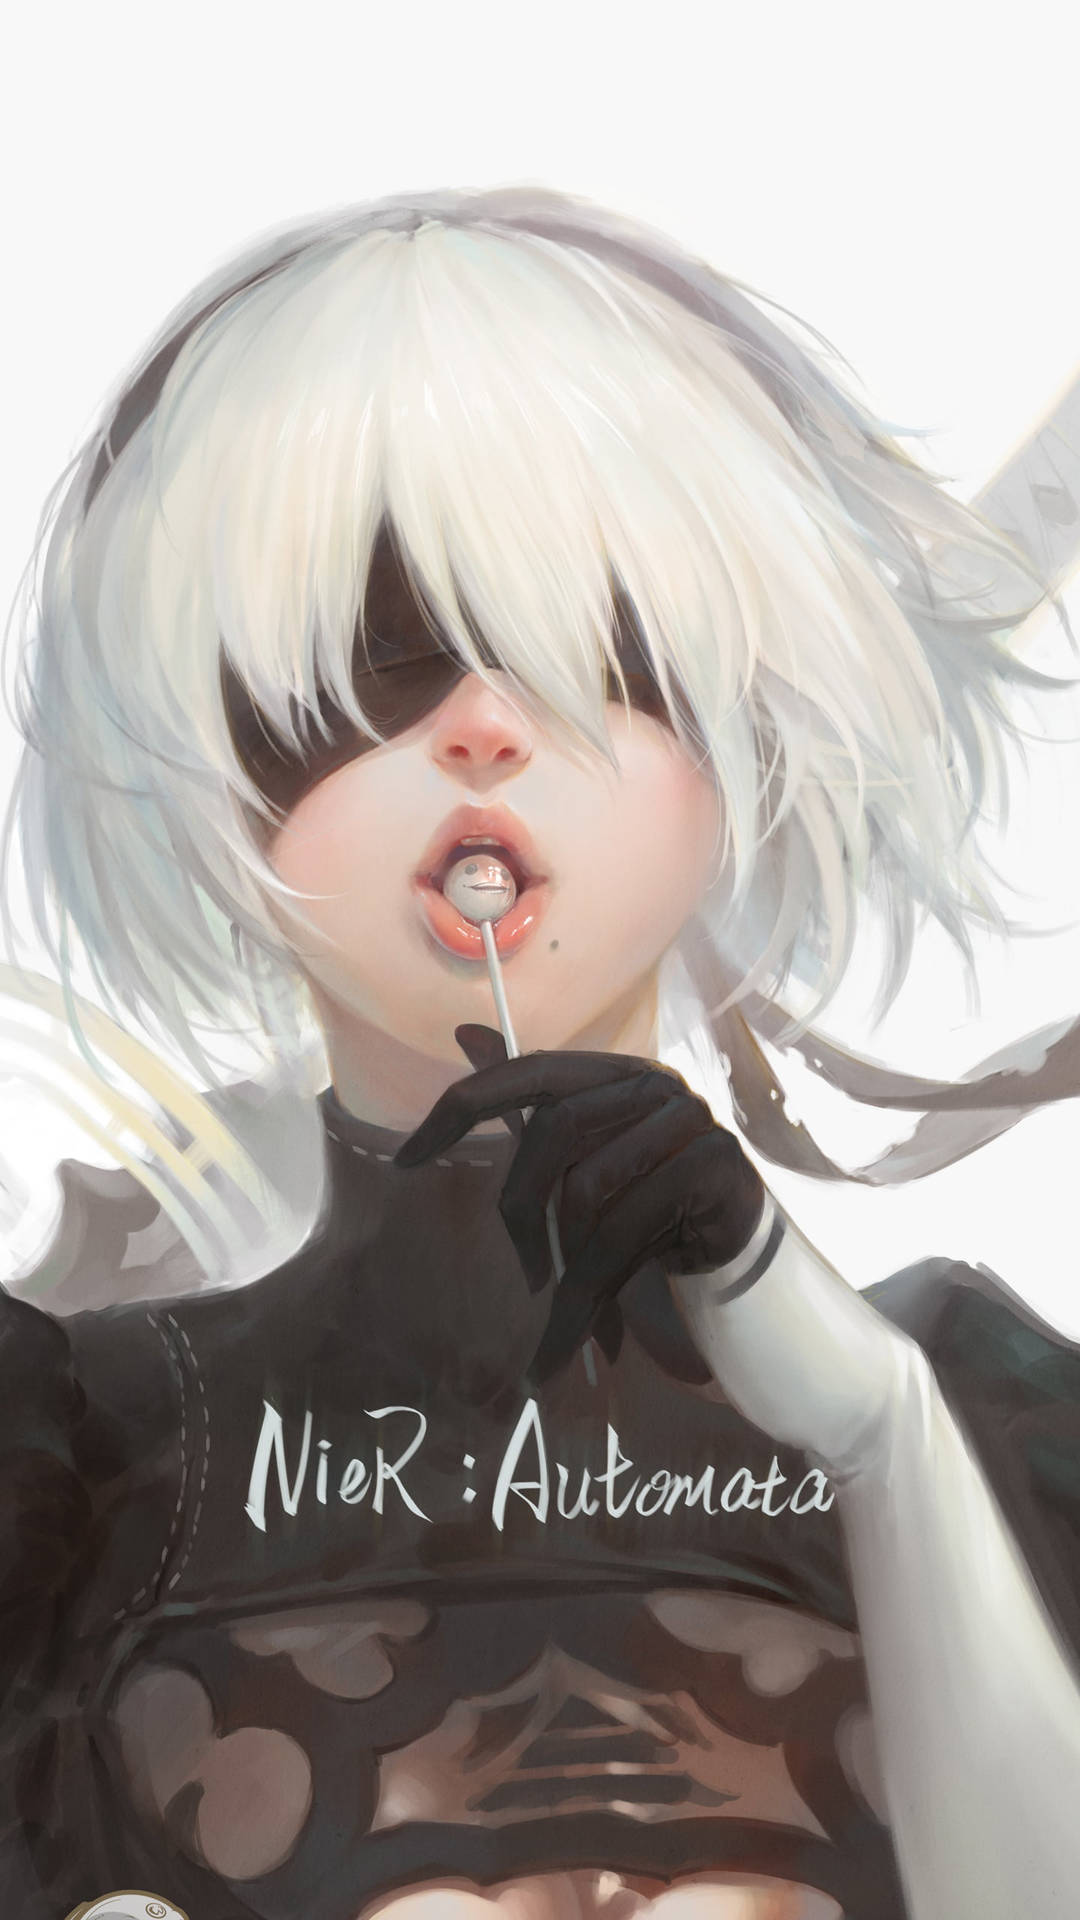 Top 999+ Nier Automata 4k Wallpapers Full HD, 4K✅Free to Use